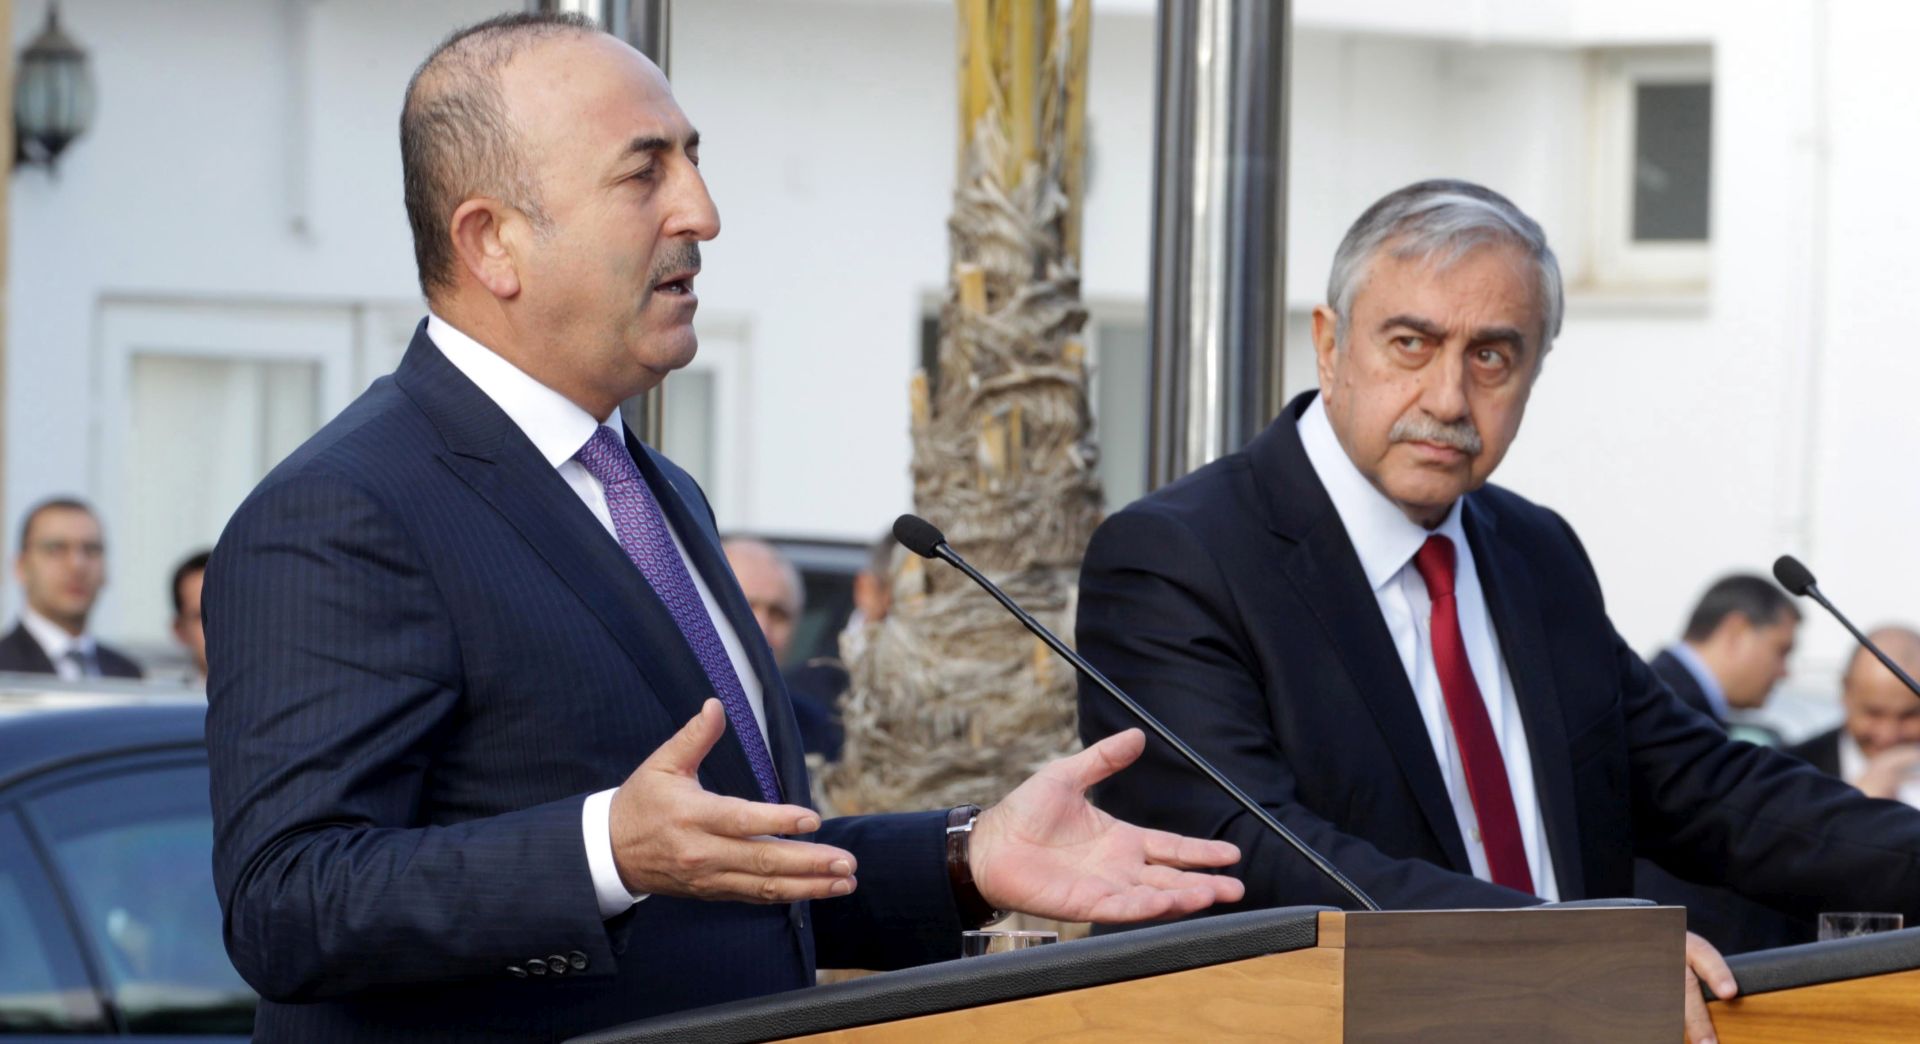 epa05807161 Turkish Foreign Minister Mevlut Cavusoglu (L) with the Turkish Cypriot leader Mustafa Akinci (R) give a press conference in Turkish occupied Nicosia, Cyprus, 21 February 2017.  EPA/STR